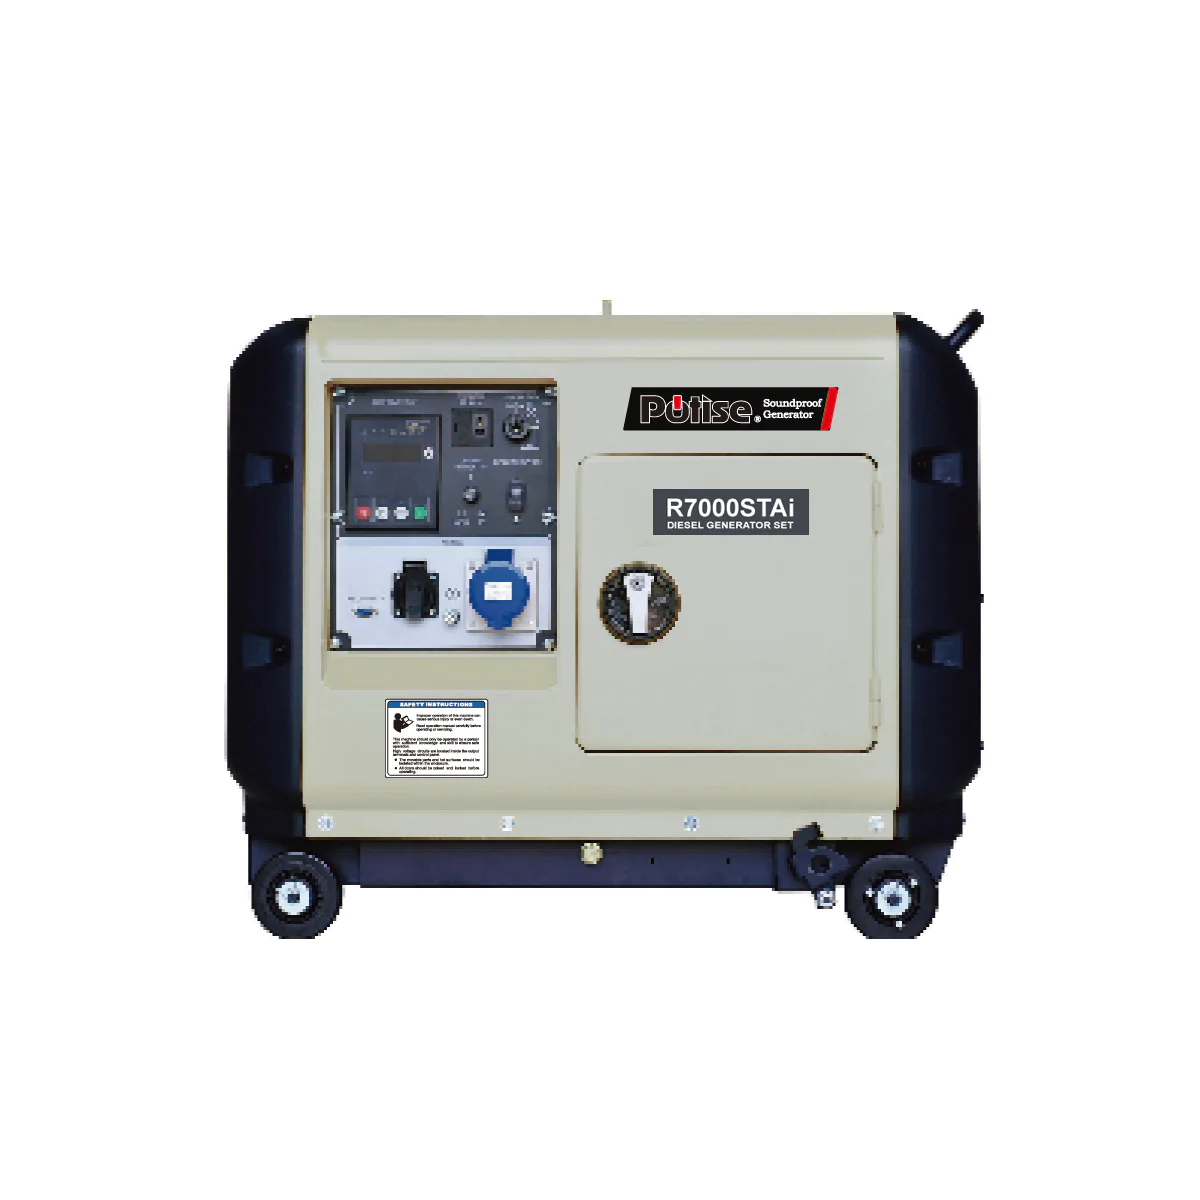 The benefits of owning a portable generator